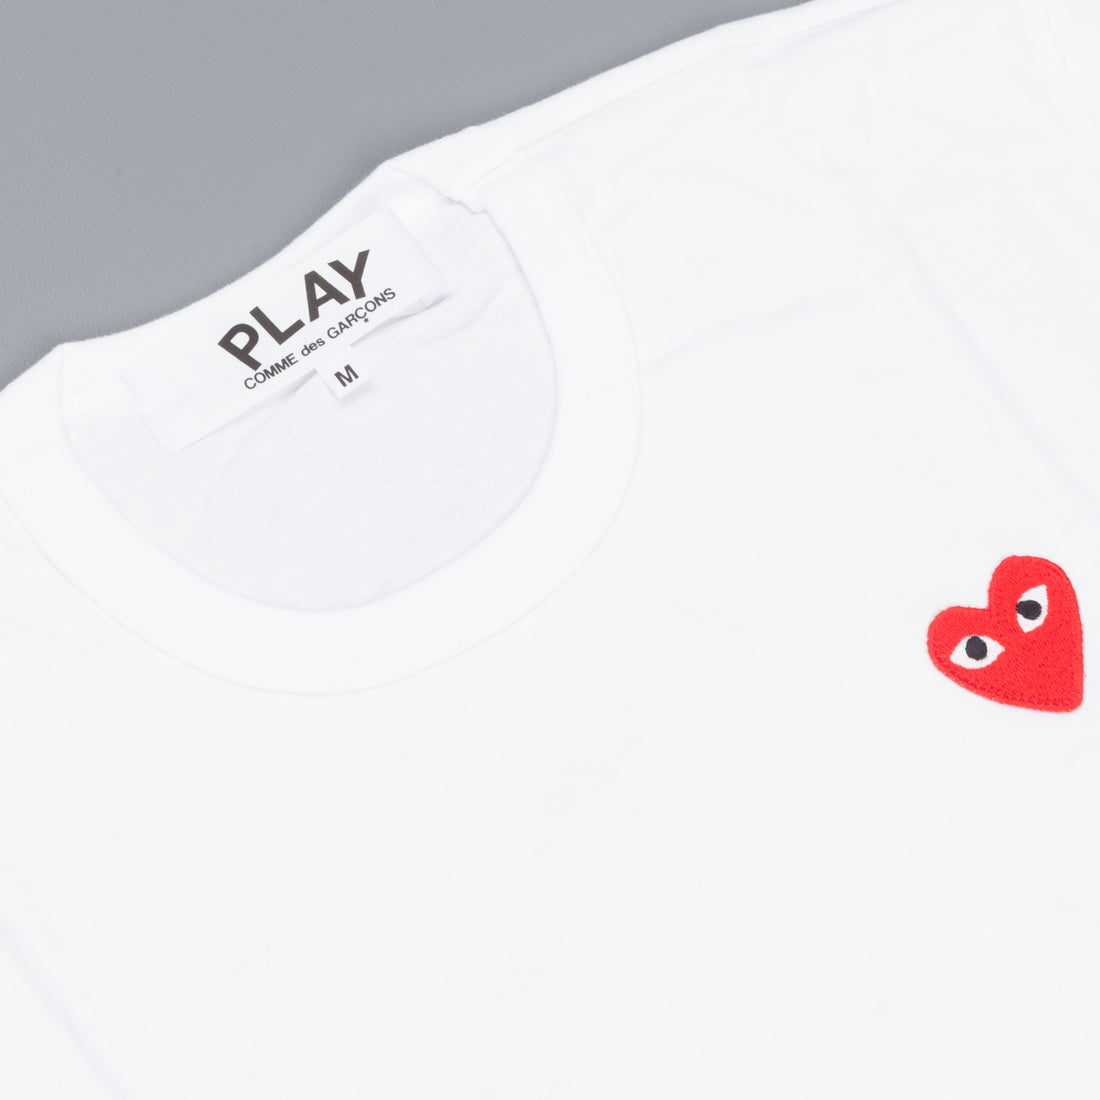 PLAY Longsleeve Tee white Red Heart – Frans Boone Store